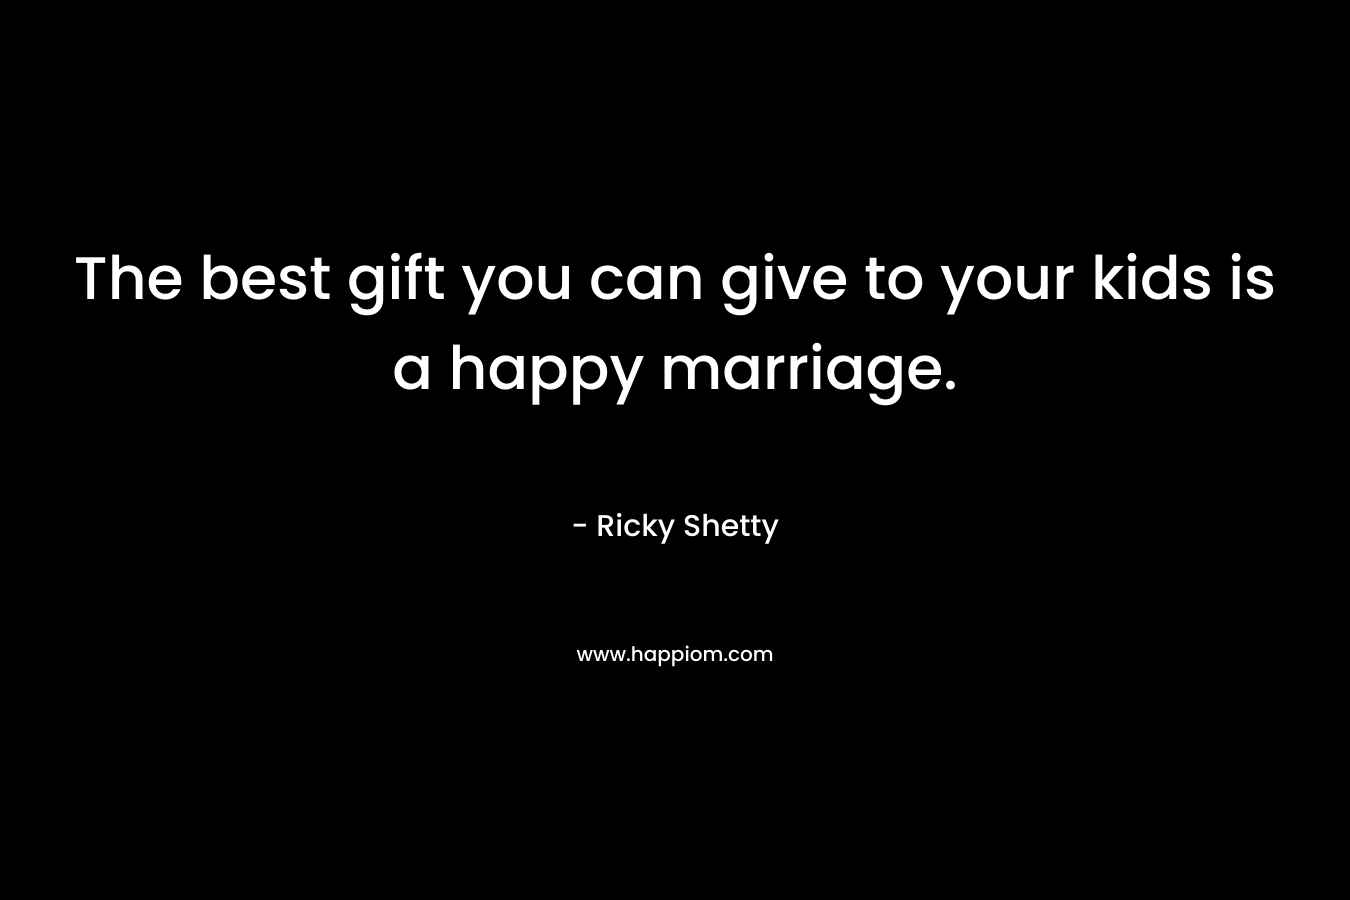 The best gift you can give to your kids is a happy marriage.